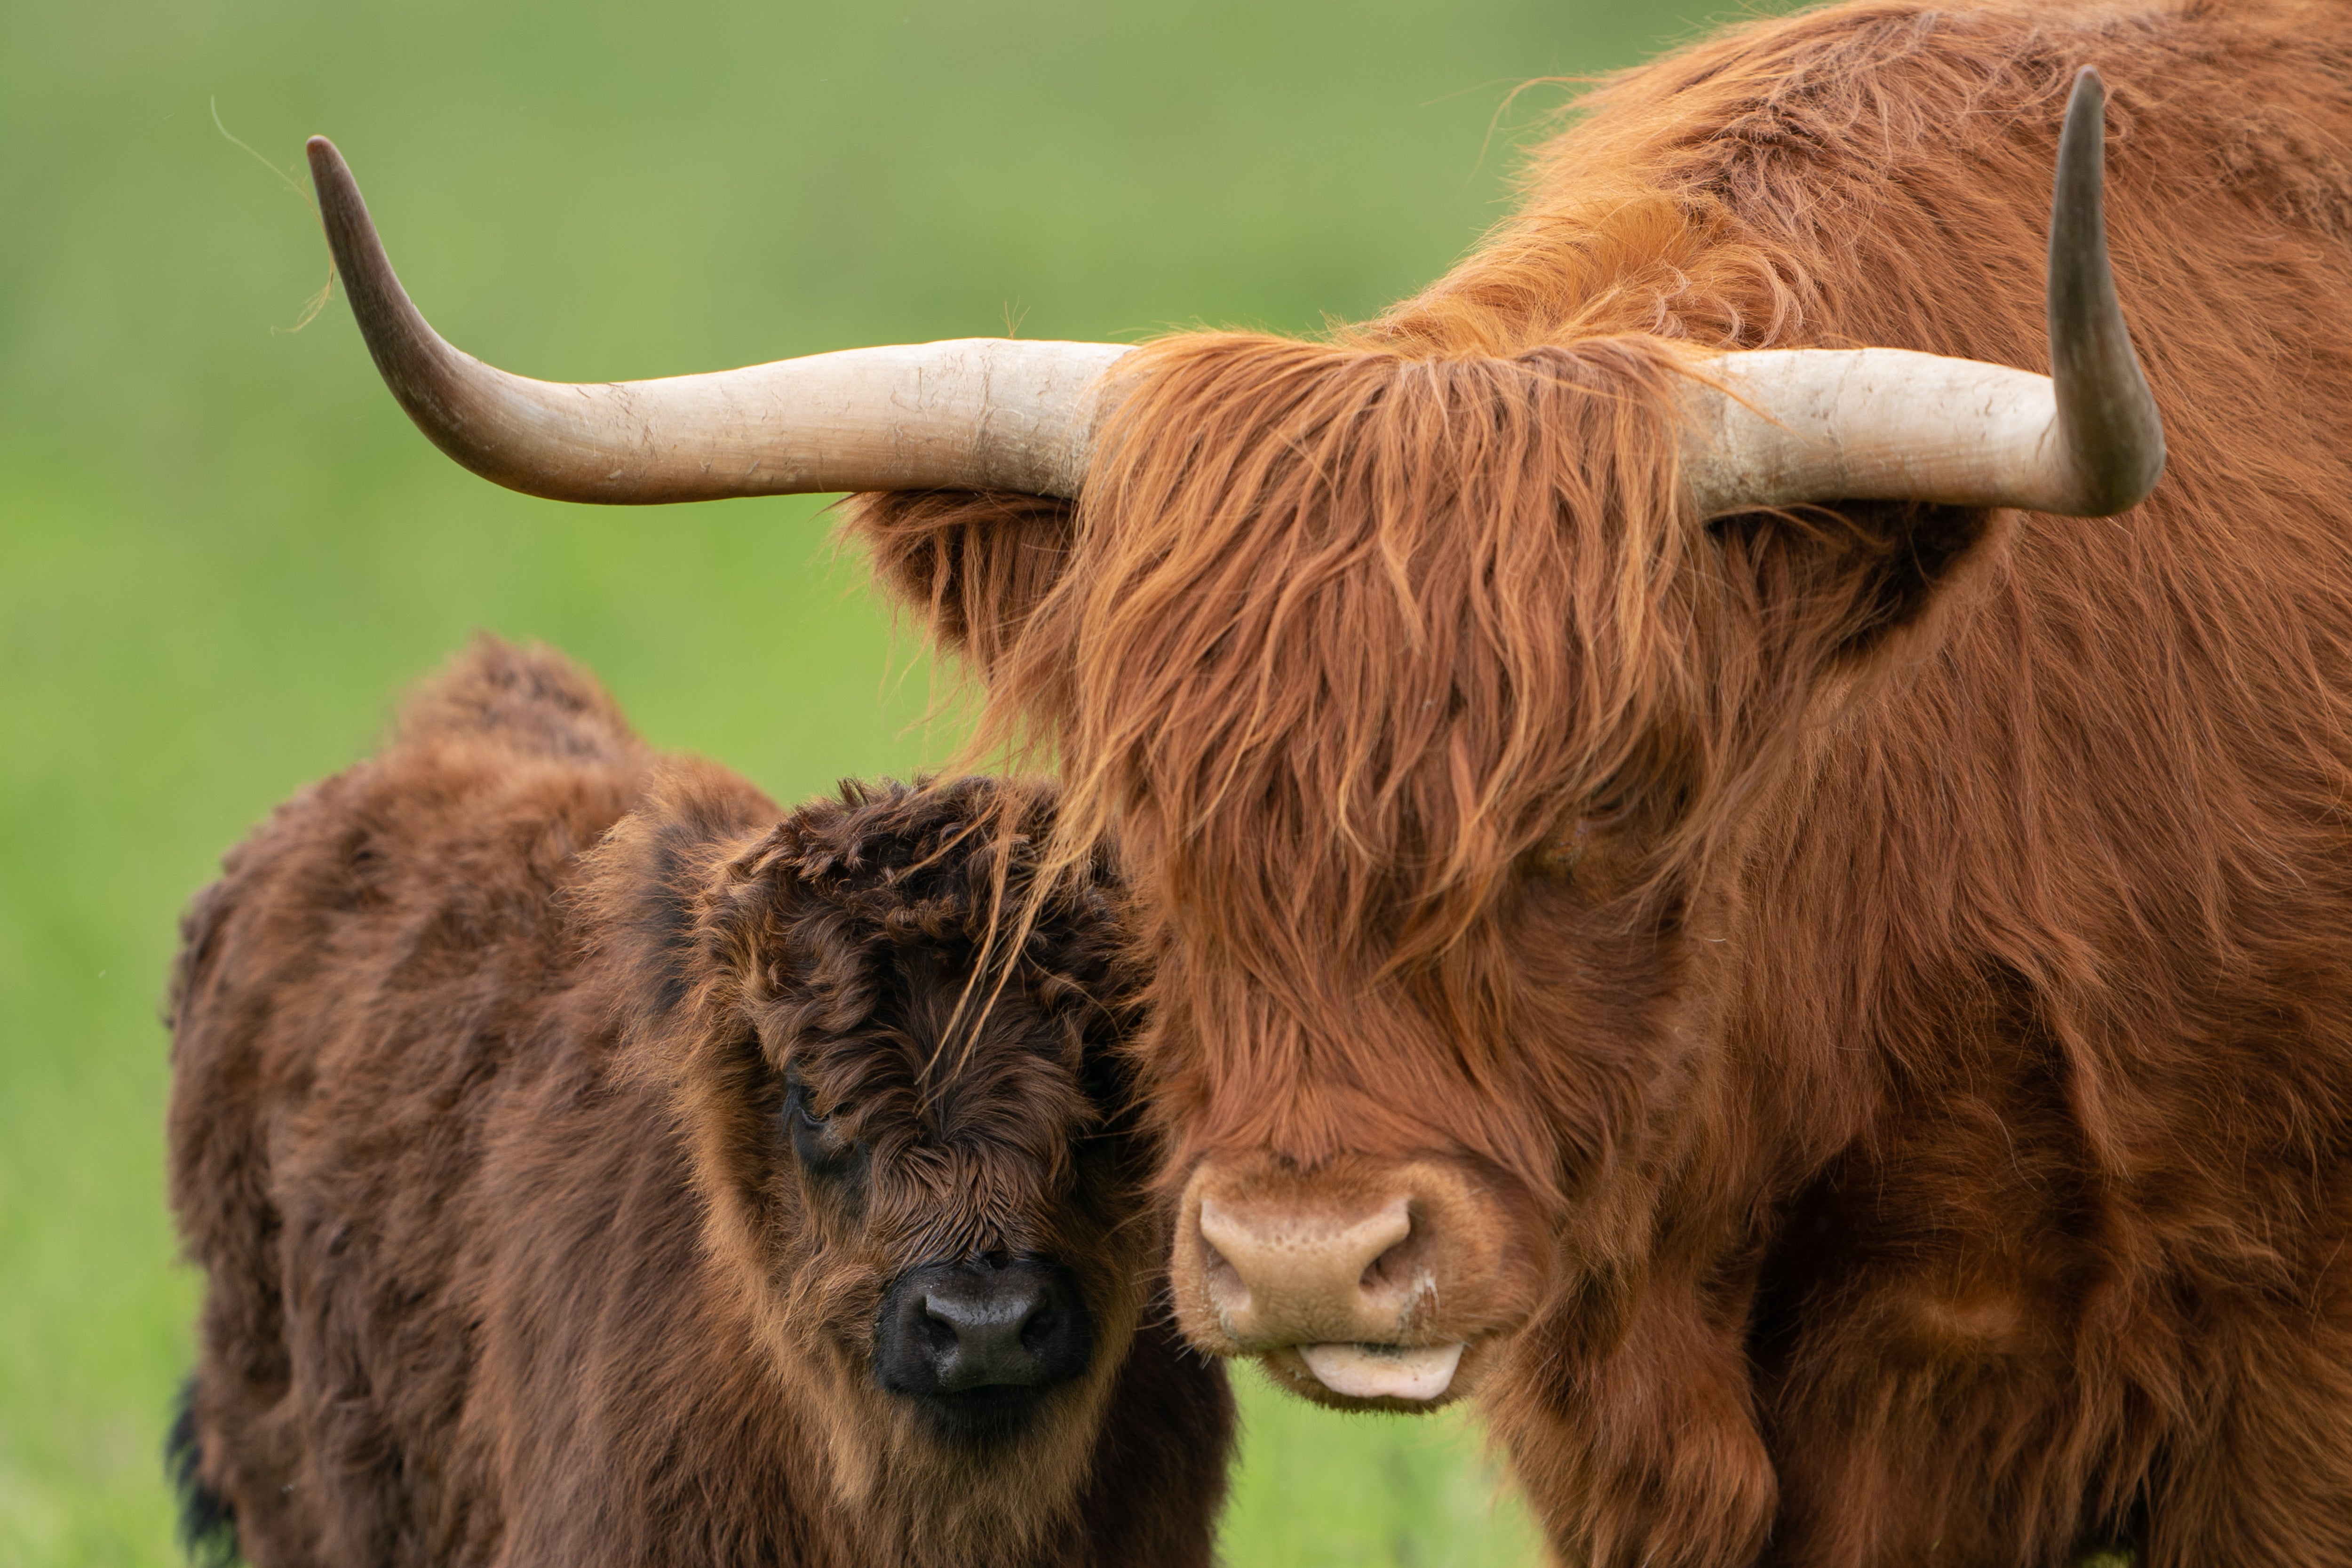 Highland cow Apple with her calf Malin at the National Trust’s Wicken Fen nature reserve in Cambridgeshire, where their grazing will help create habitats for other species